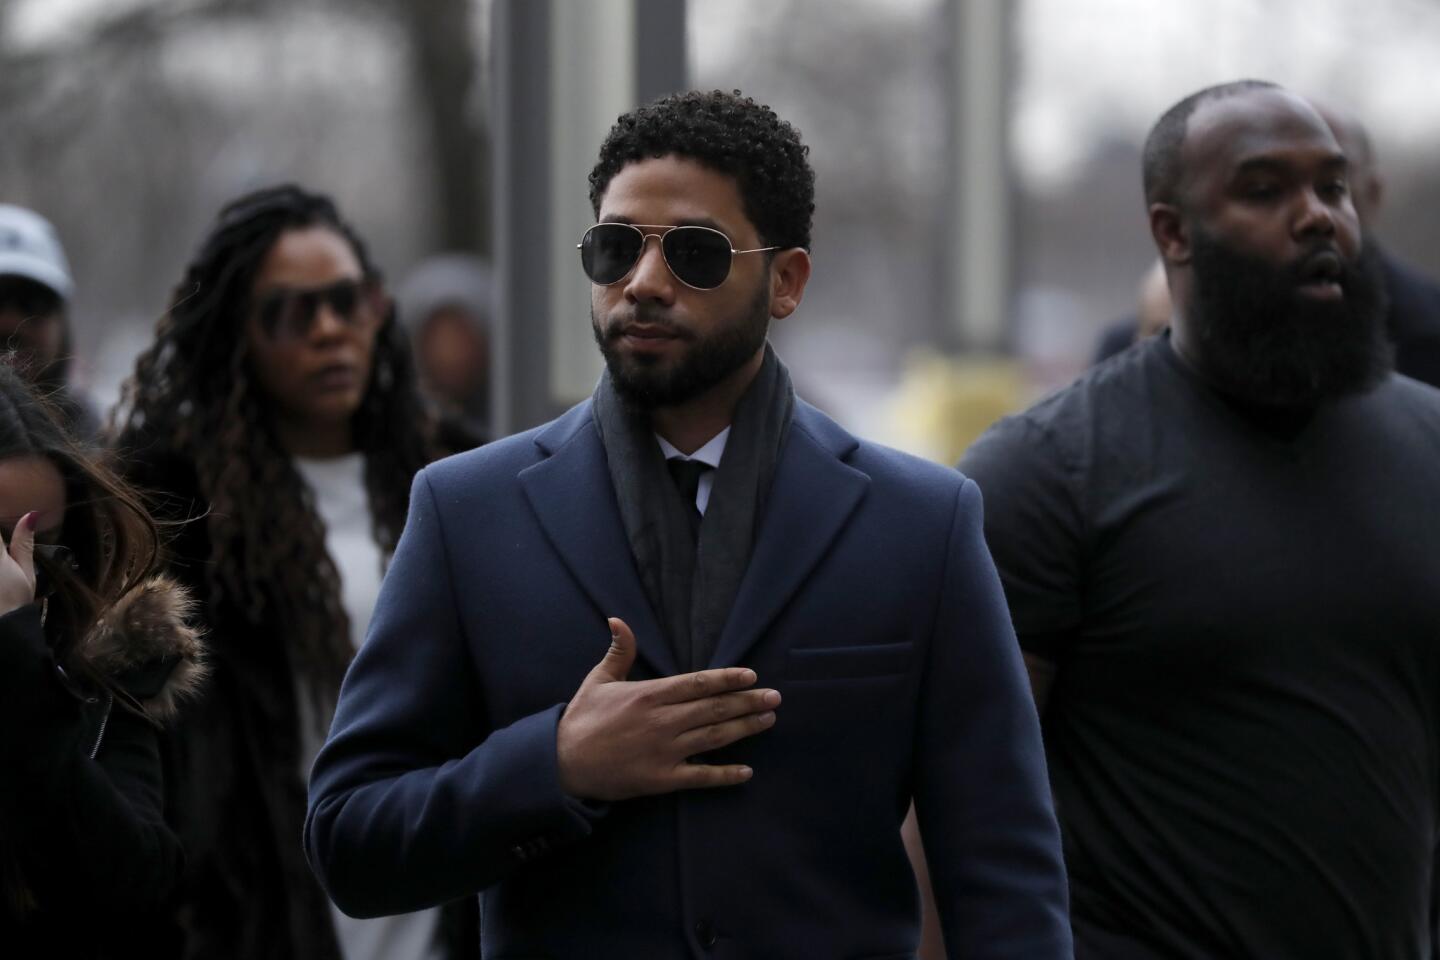 Jussie Smollett gestures to supporters who chant for him as he arrives for a hearing at the Leighton Criminal Court Building in Chicago on March 14, 2019.